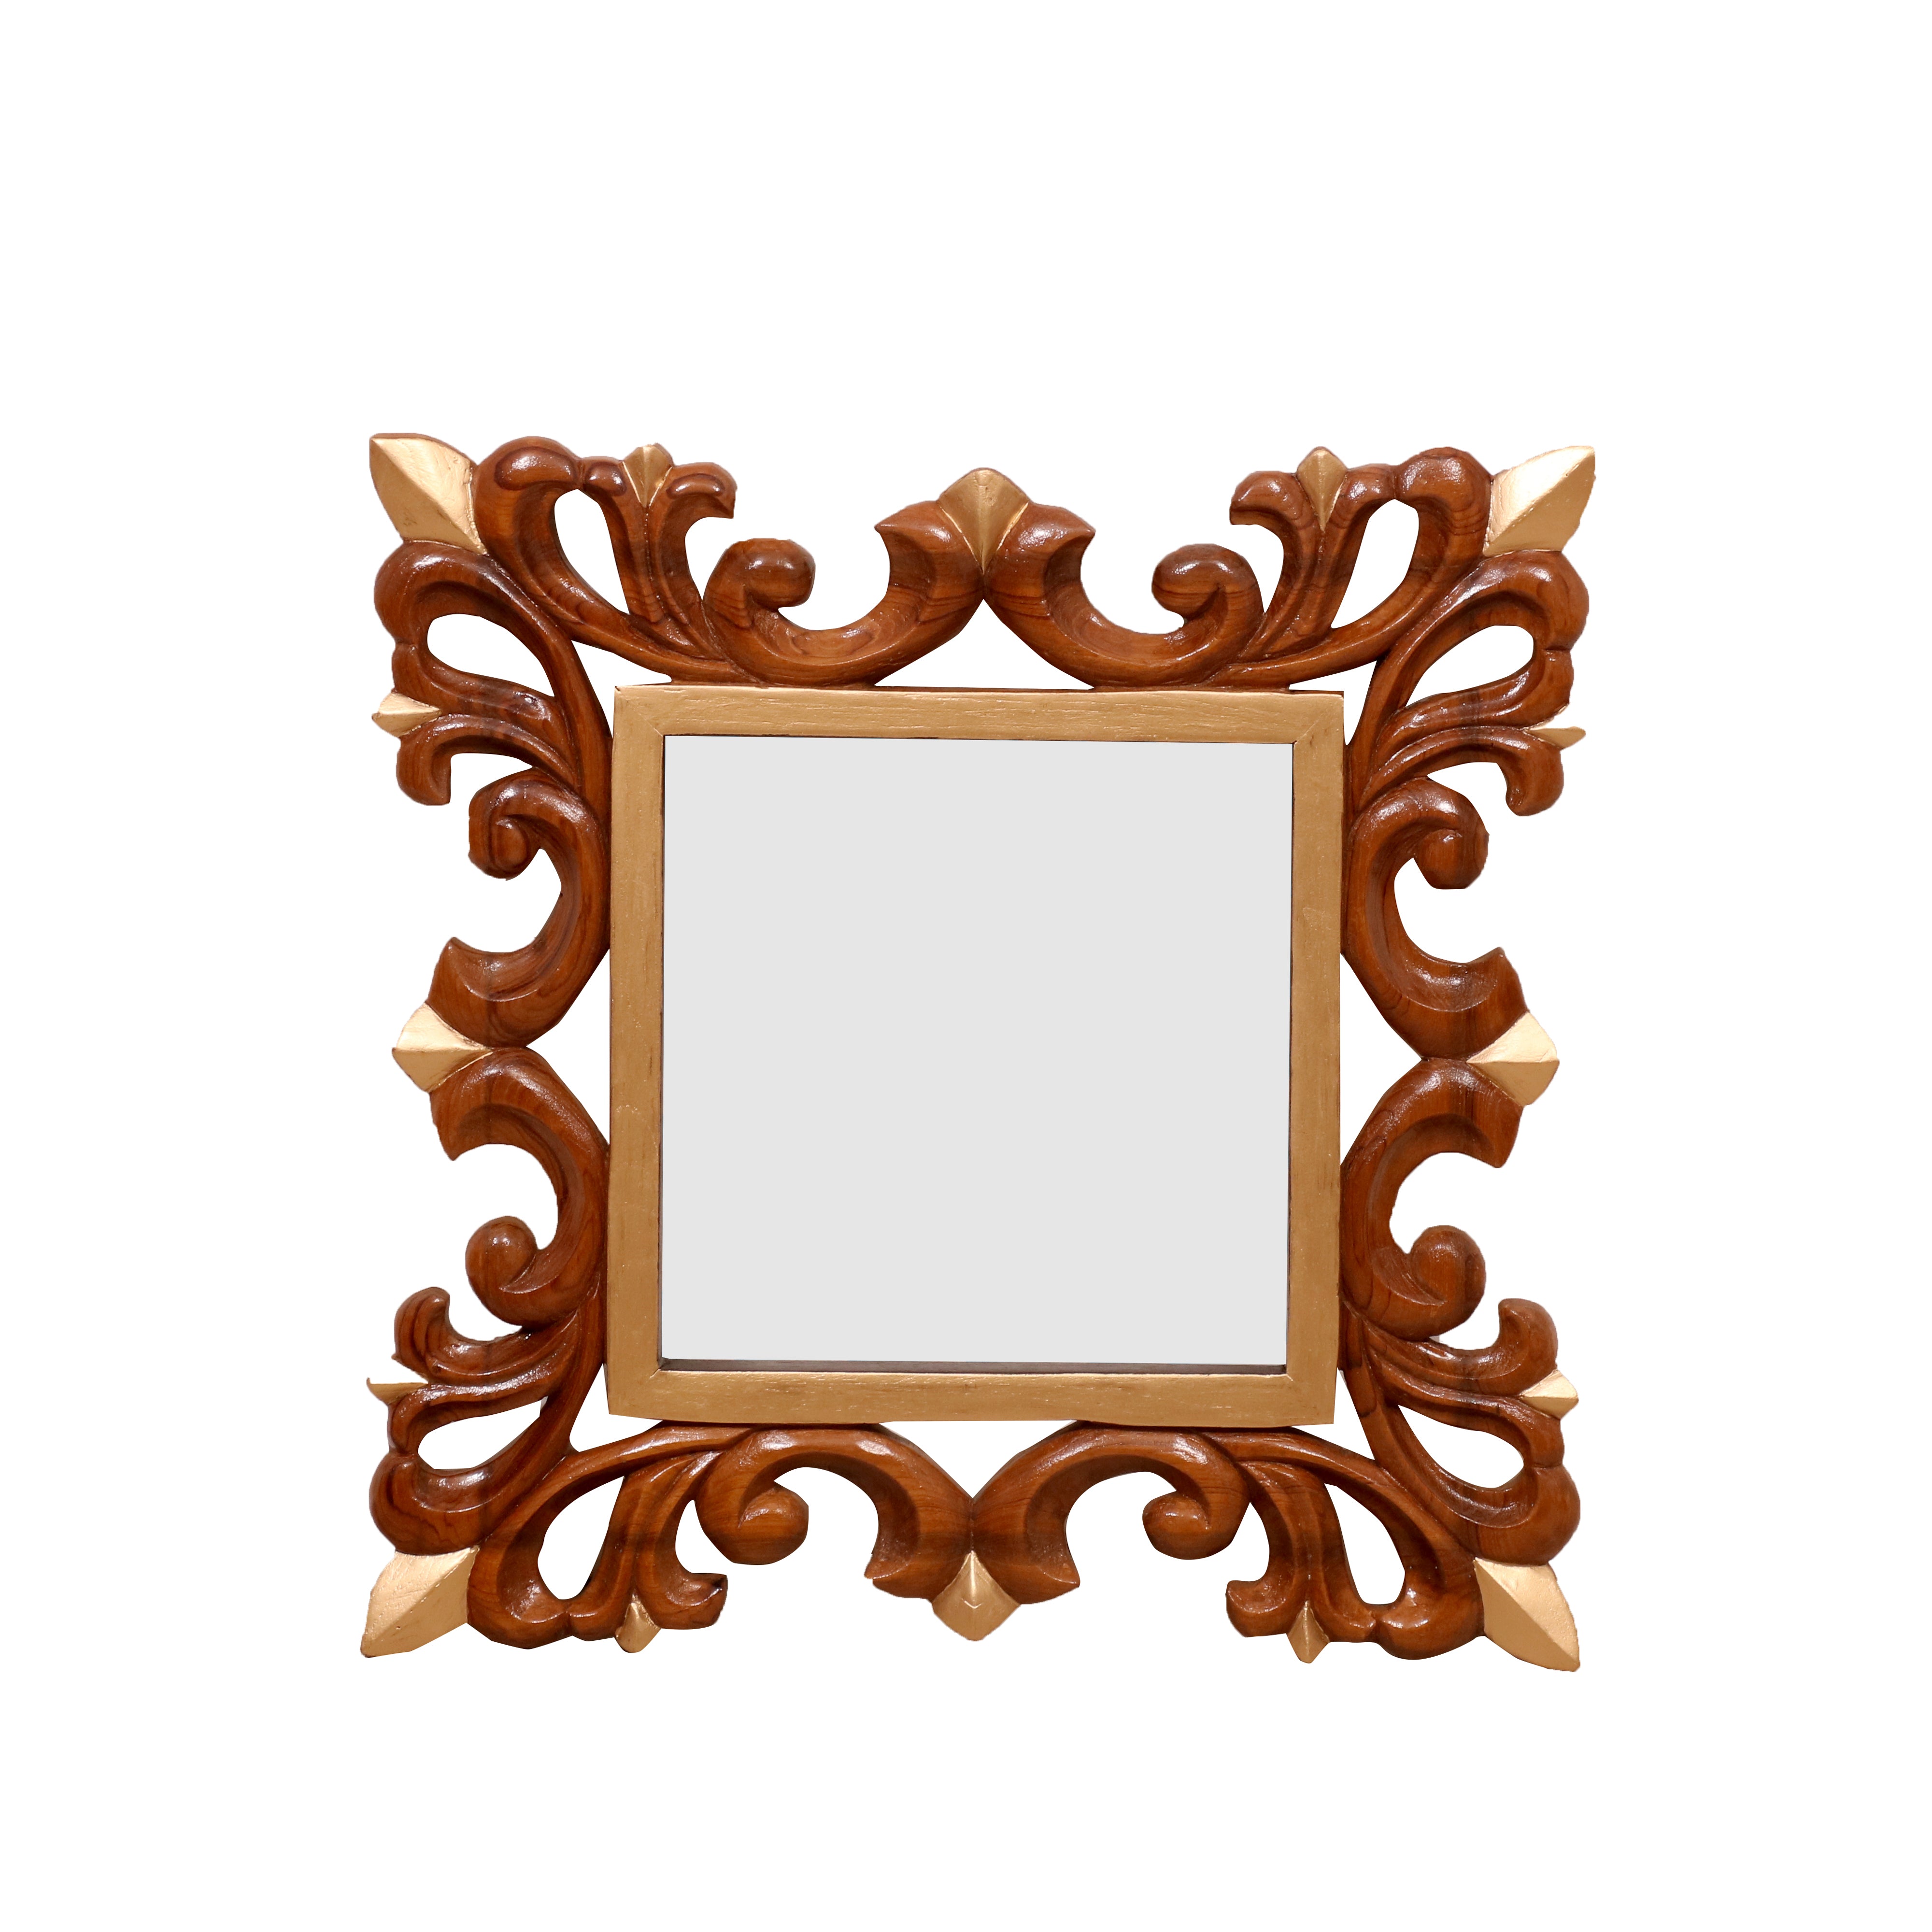 Wooden Square Mirror leaf style Mirror